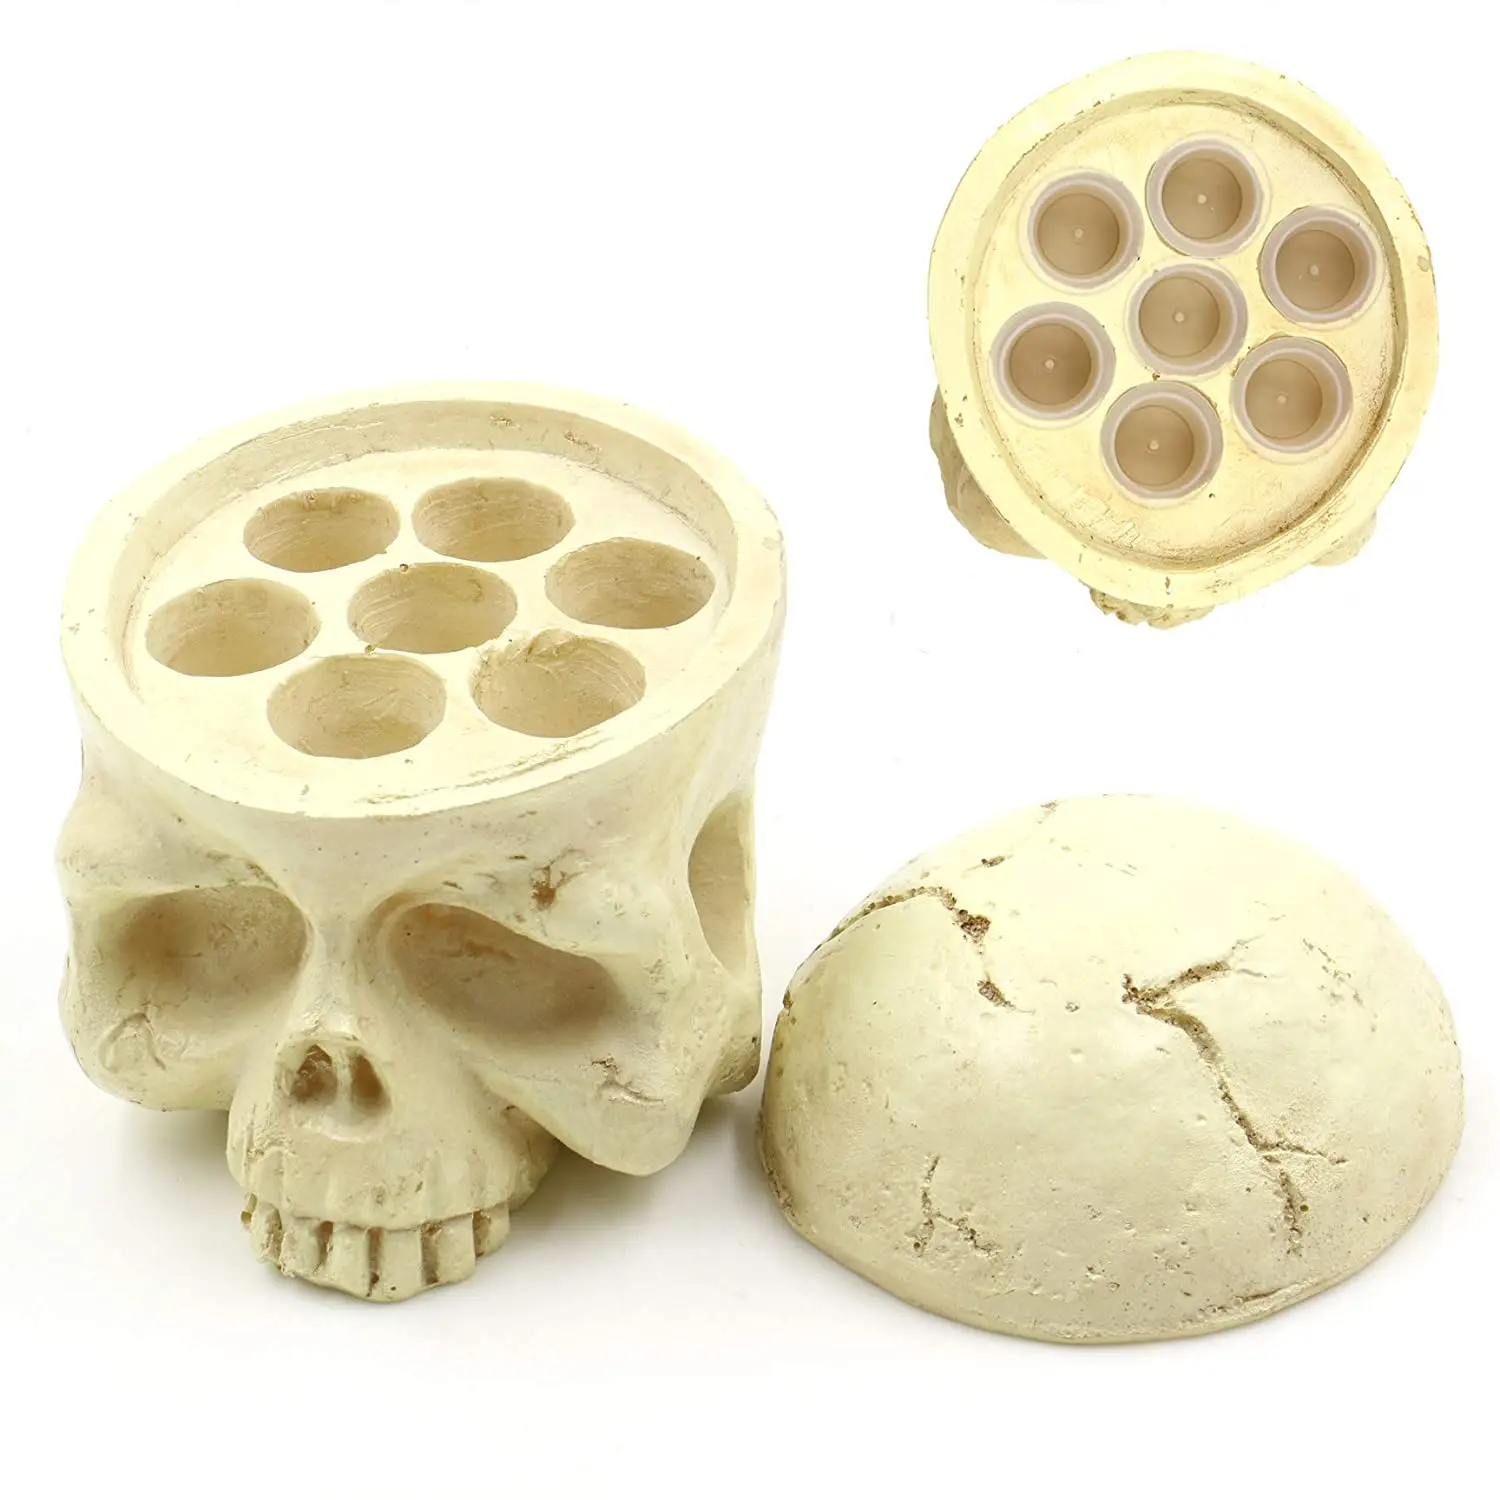 Skull Tattoo Ink Cup Holder 7 Holes Ink Cap Cup Holder For Tattoo Supplies  Free Shipping - Tattoo Accesories - AliExpress